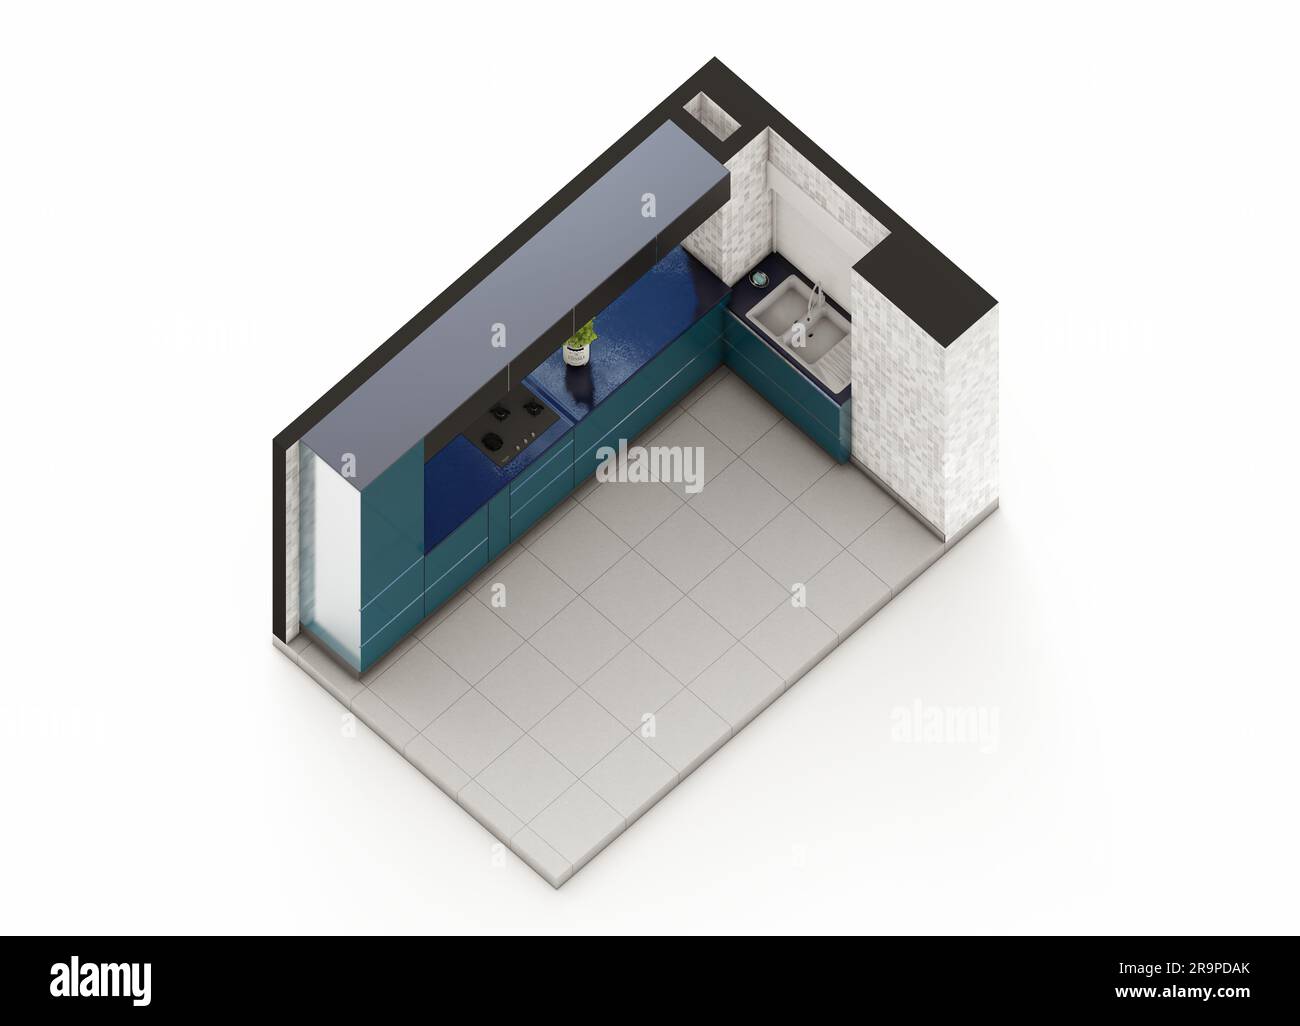 Teal green and grey kitchen cabinet isometric visualization Stock Photo